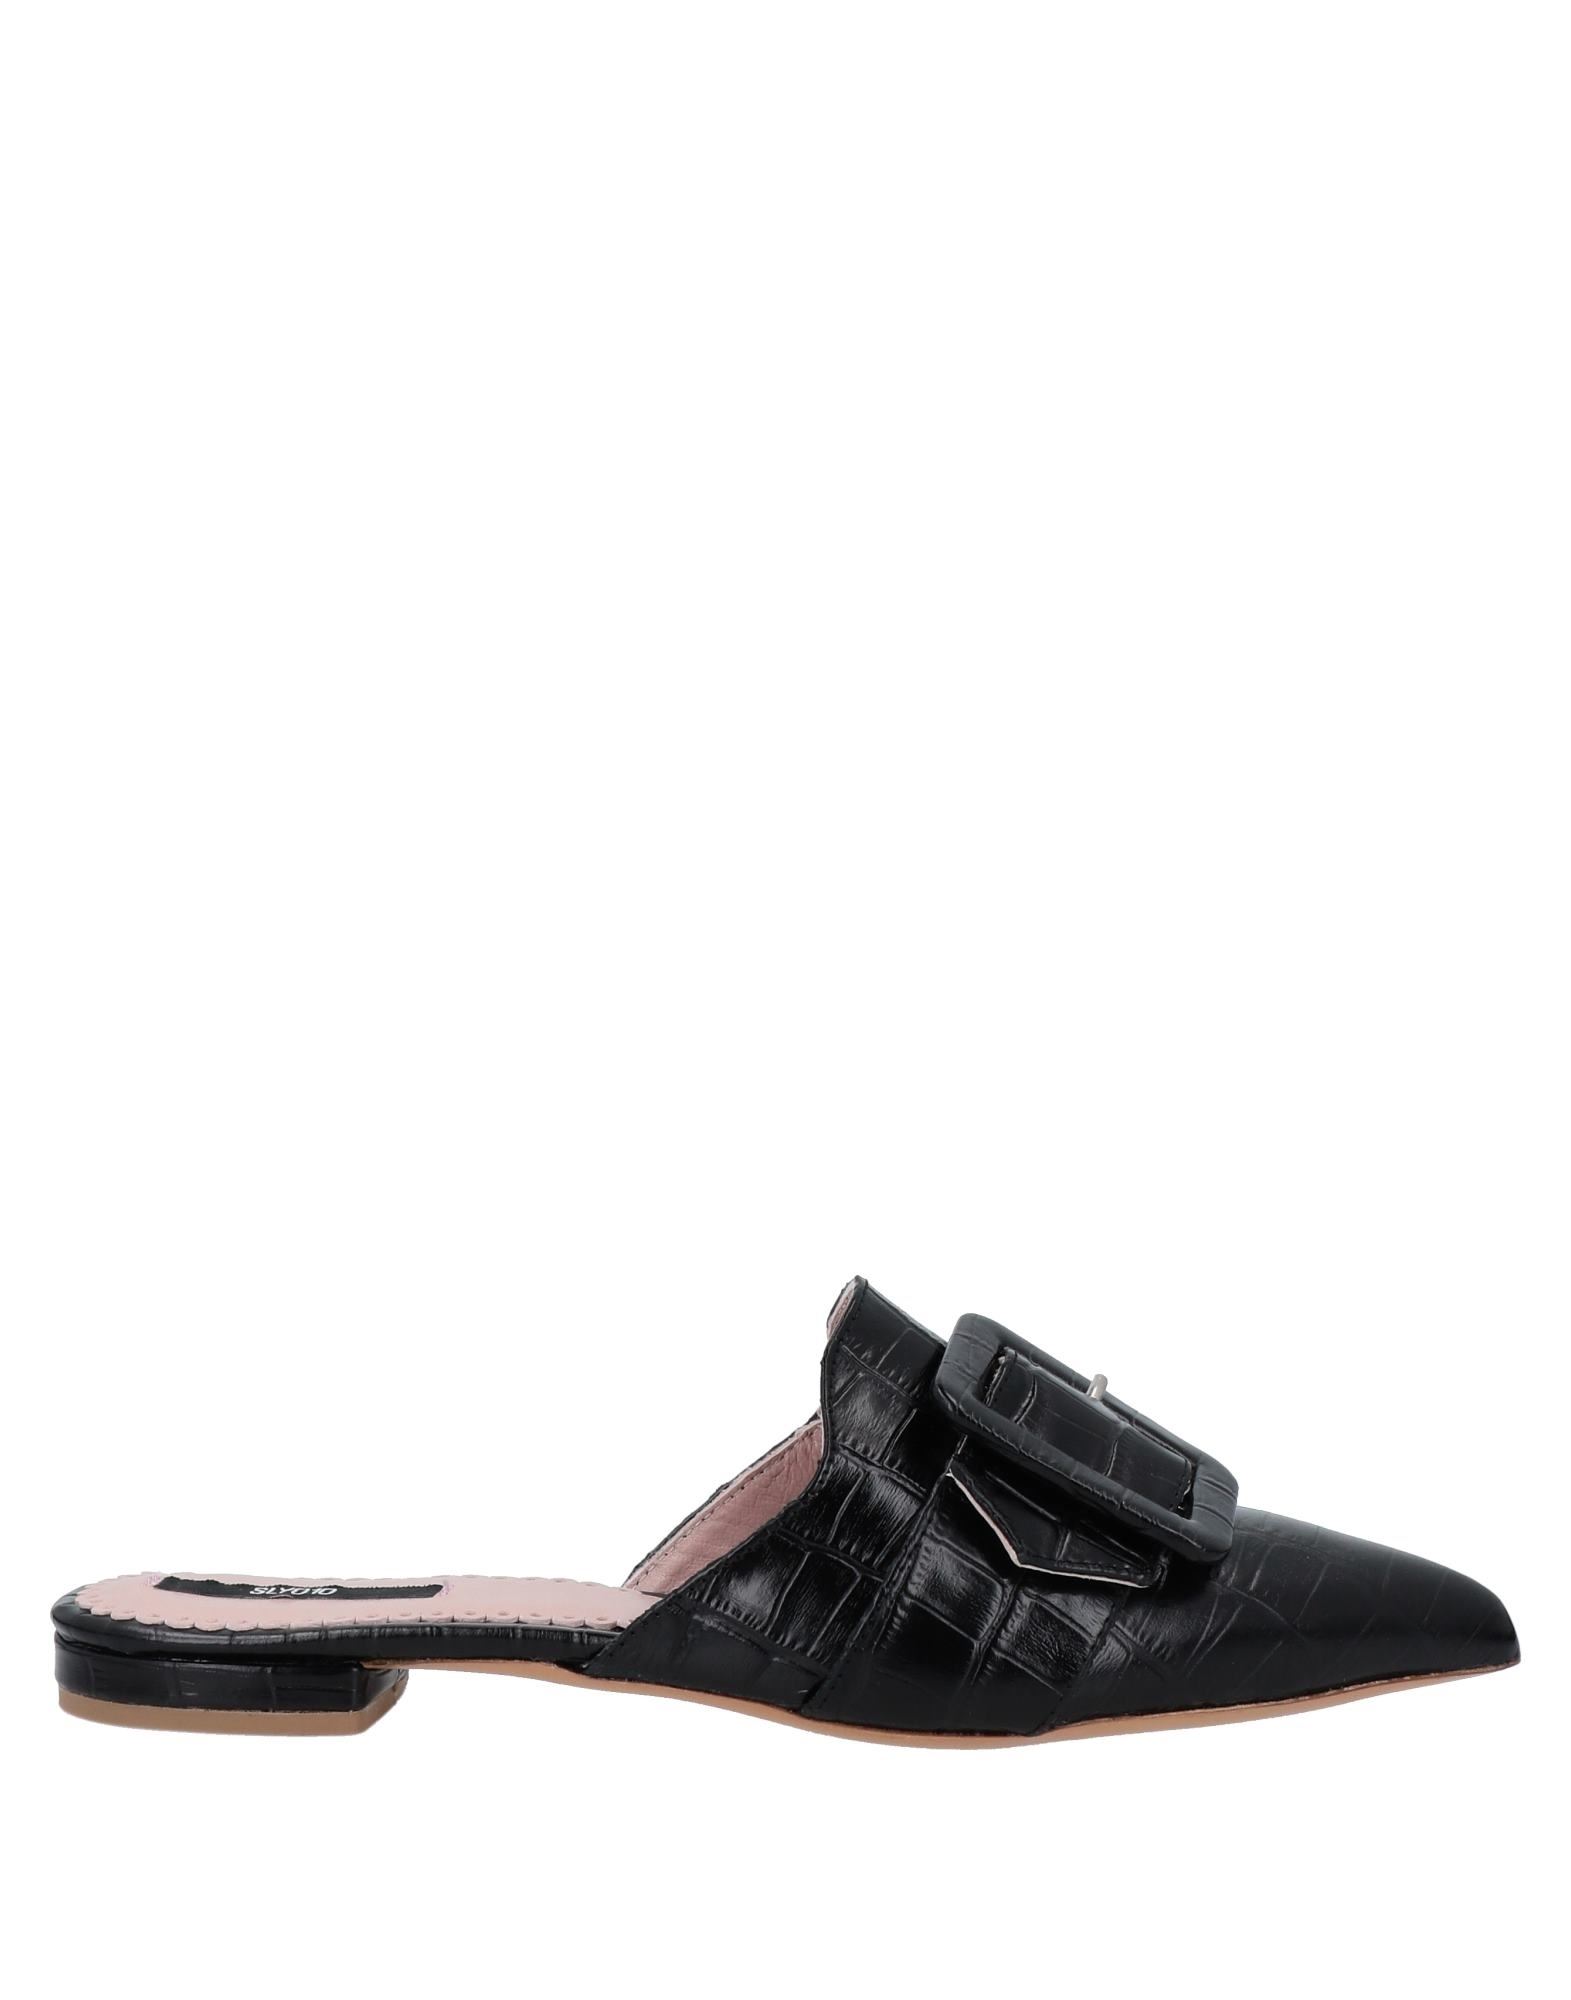 Sly010 Man Mules & Clogs Black Size 4 Soft Leather